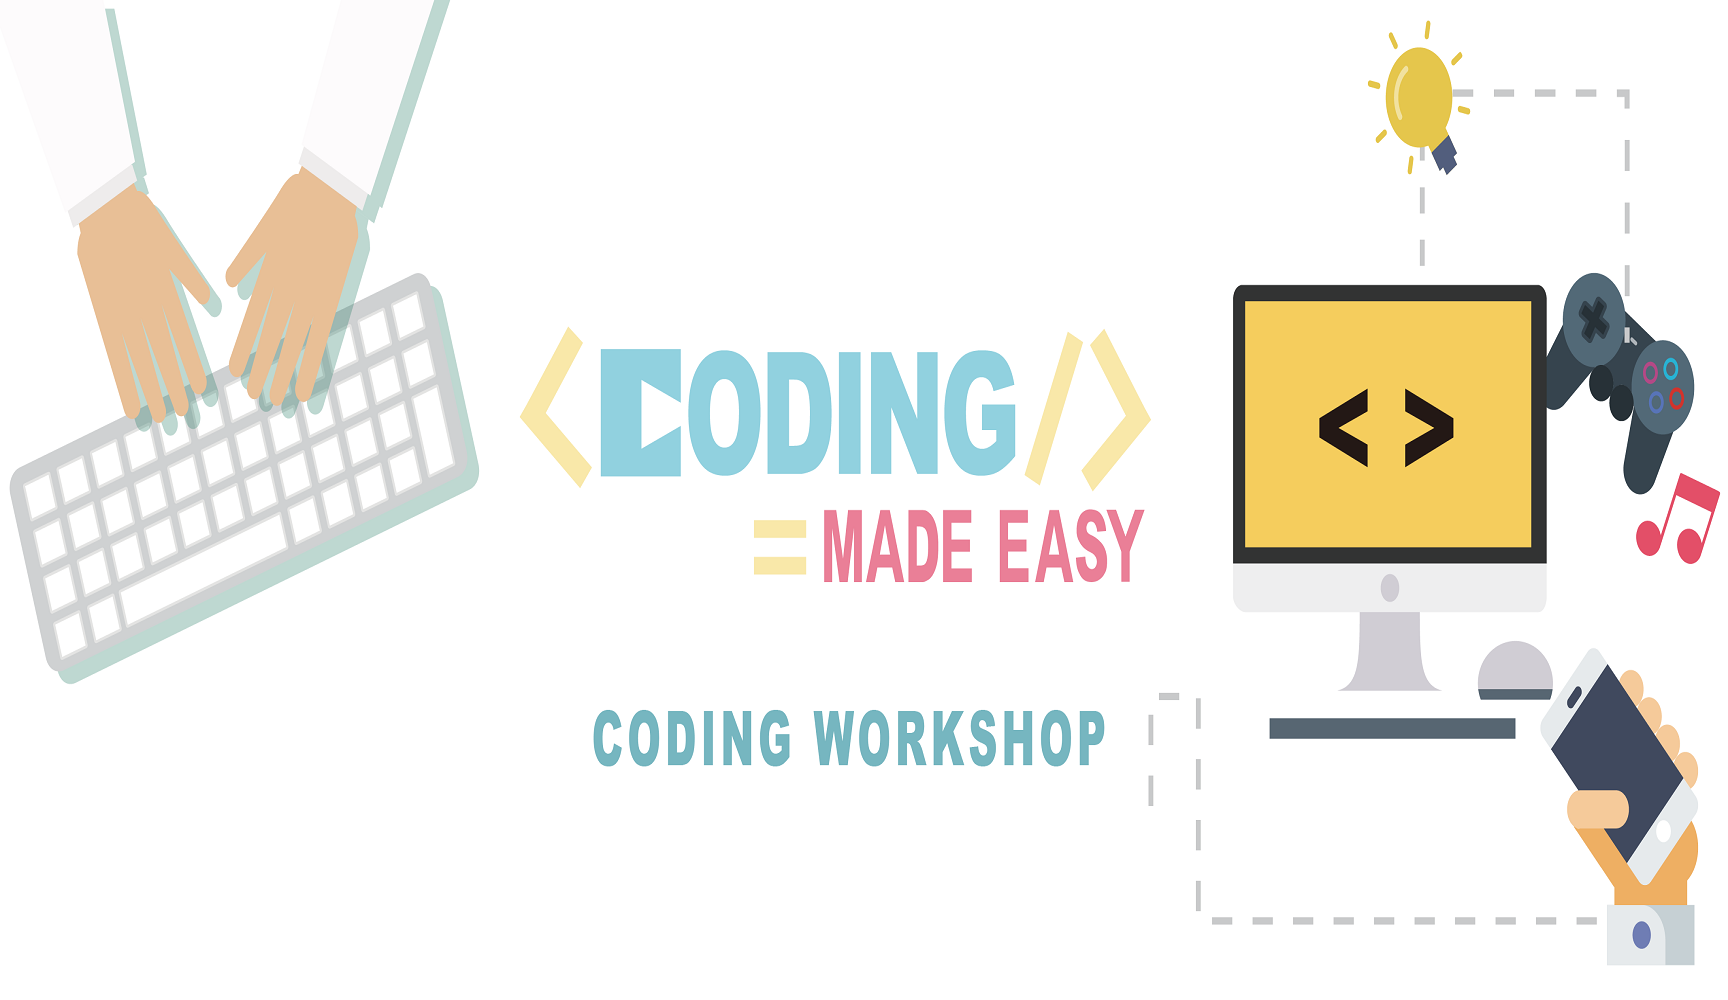 Coding Made Easy 2018 – PALMS